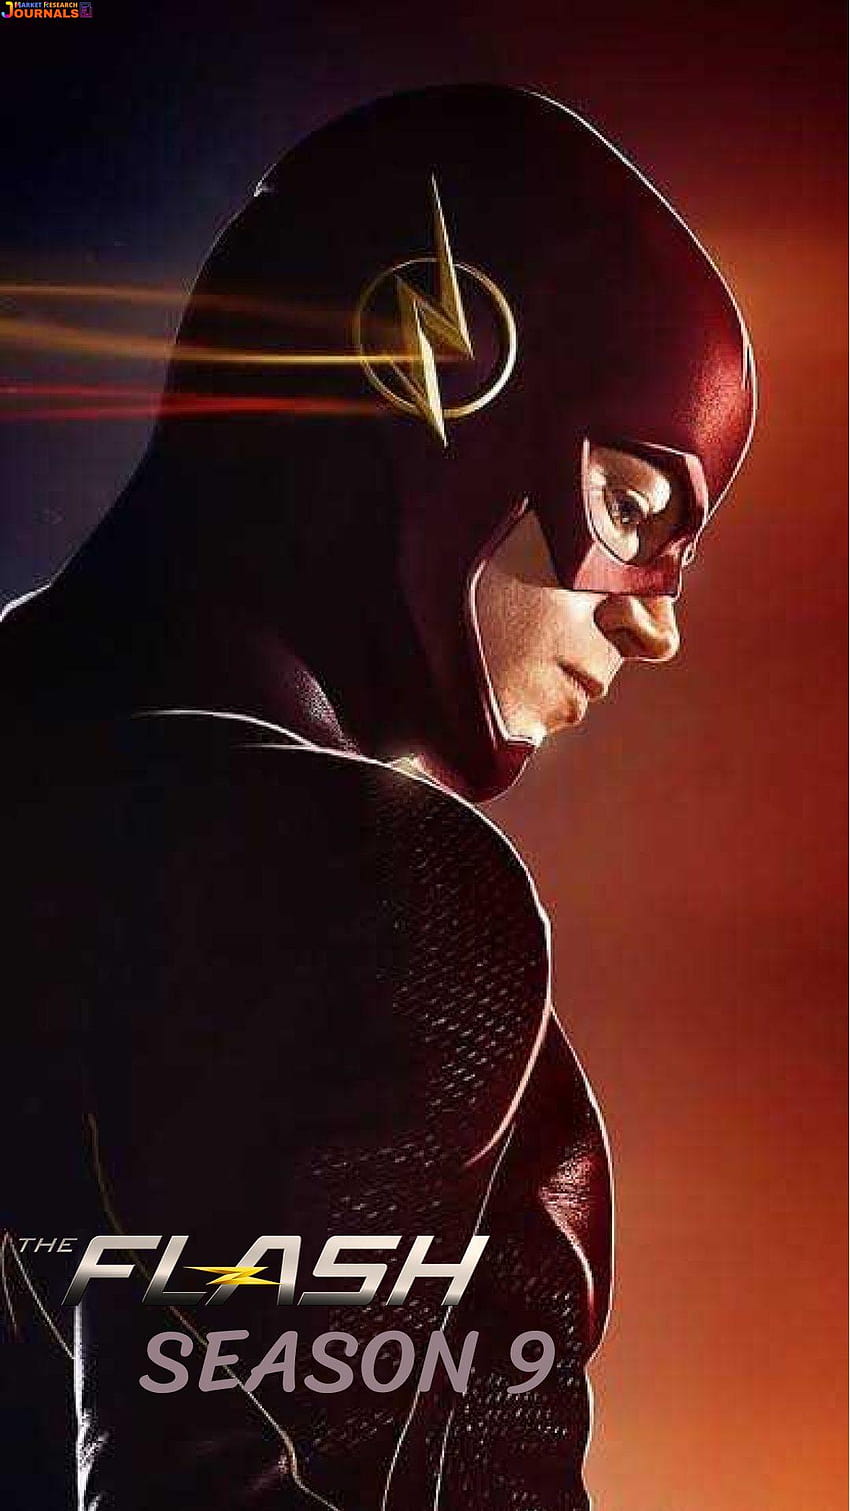 The Flash Season 9 Release Date Get your ready! popcorn The Flash Season 9 Release Date Learn more Openinghttps://marketresearchjournals/2022/03/14/the HD phone wallpaper